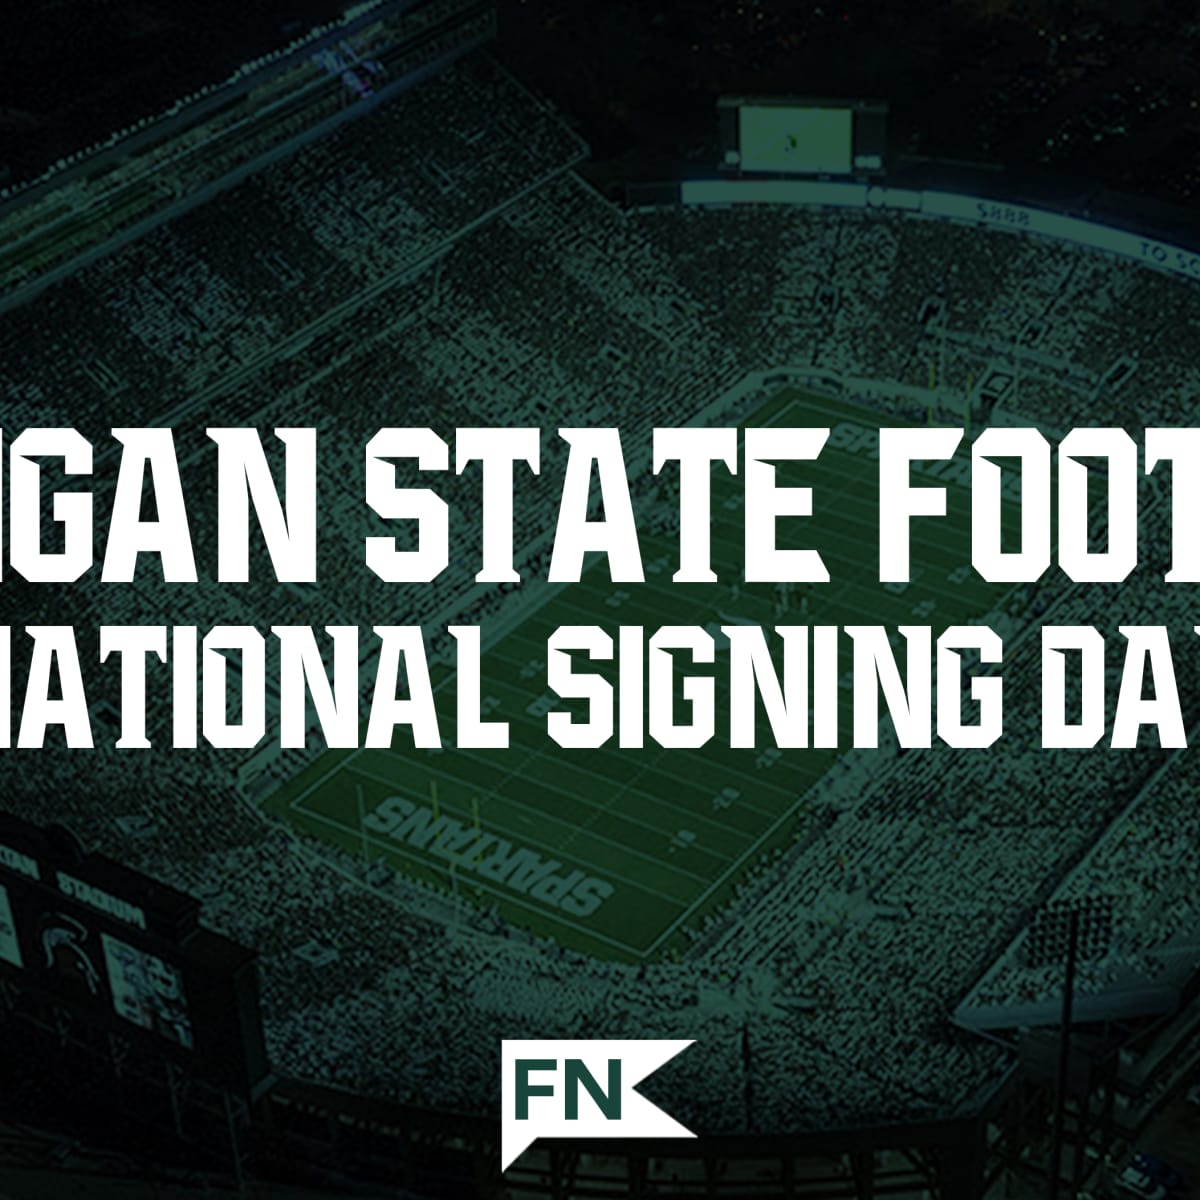 Ranking Michigan State's top all-time recruiting classes - BT Powerhouse